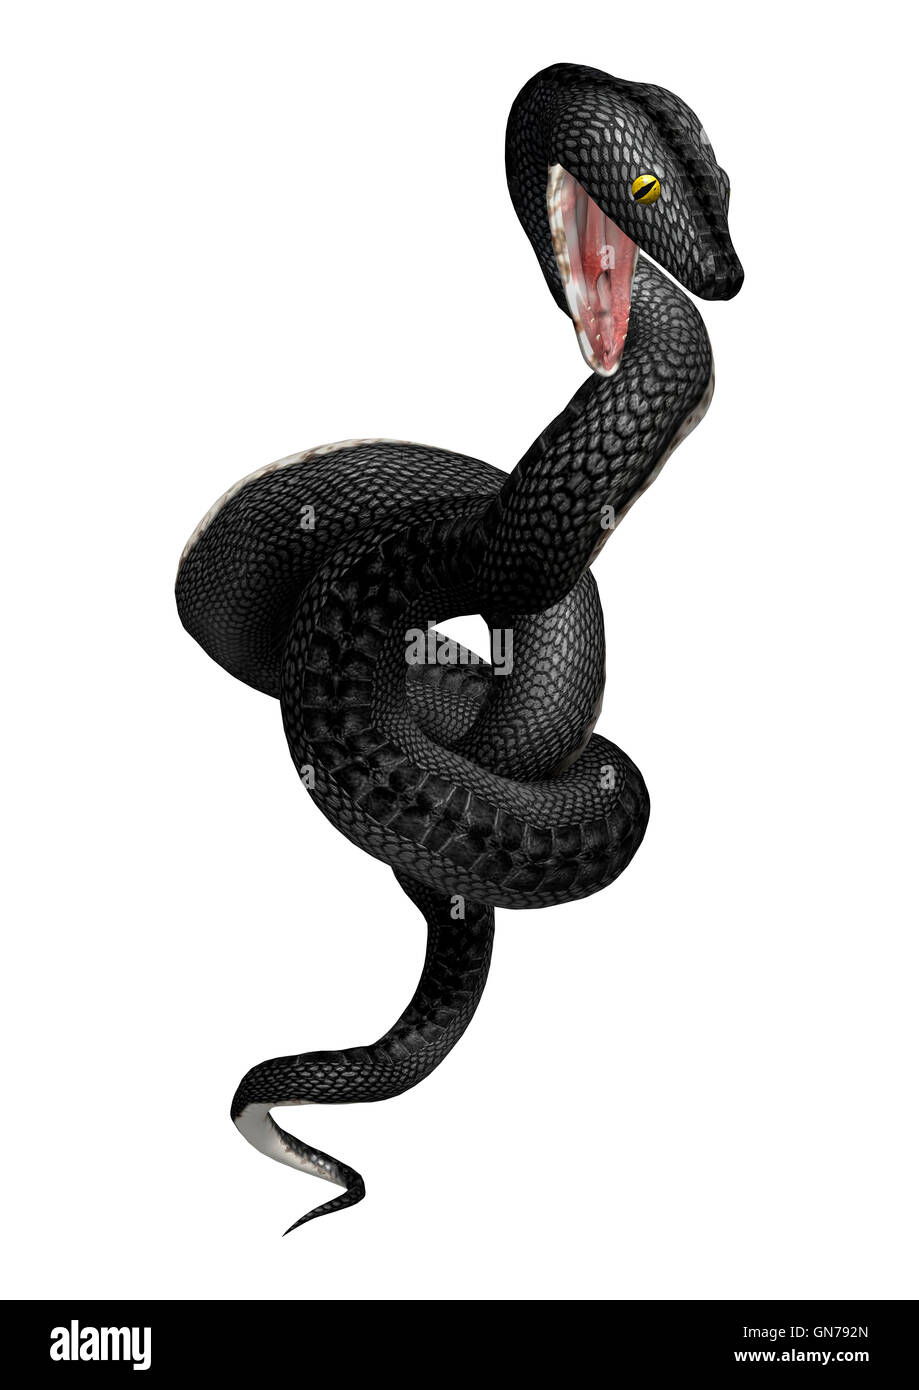 3D rendering of a southern black racer snake isolated on white background Stock Photo